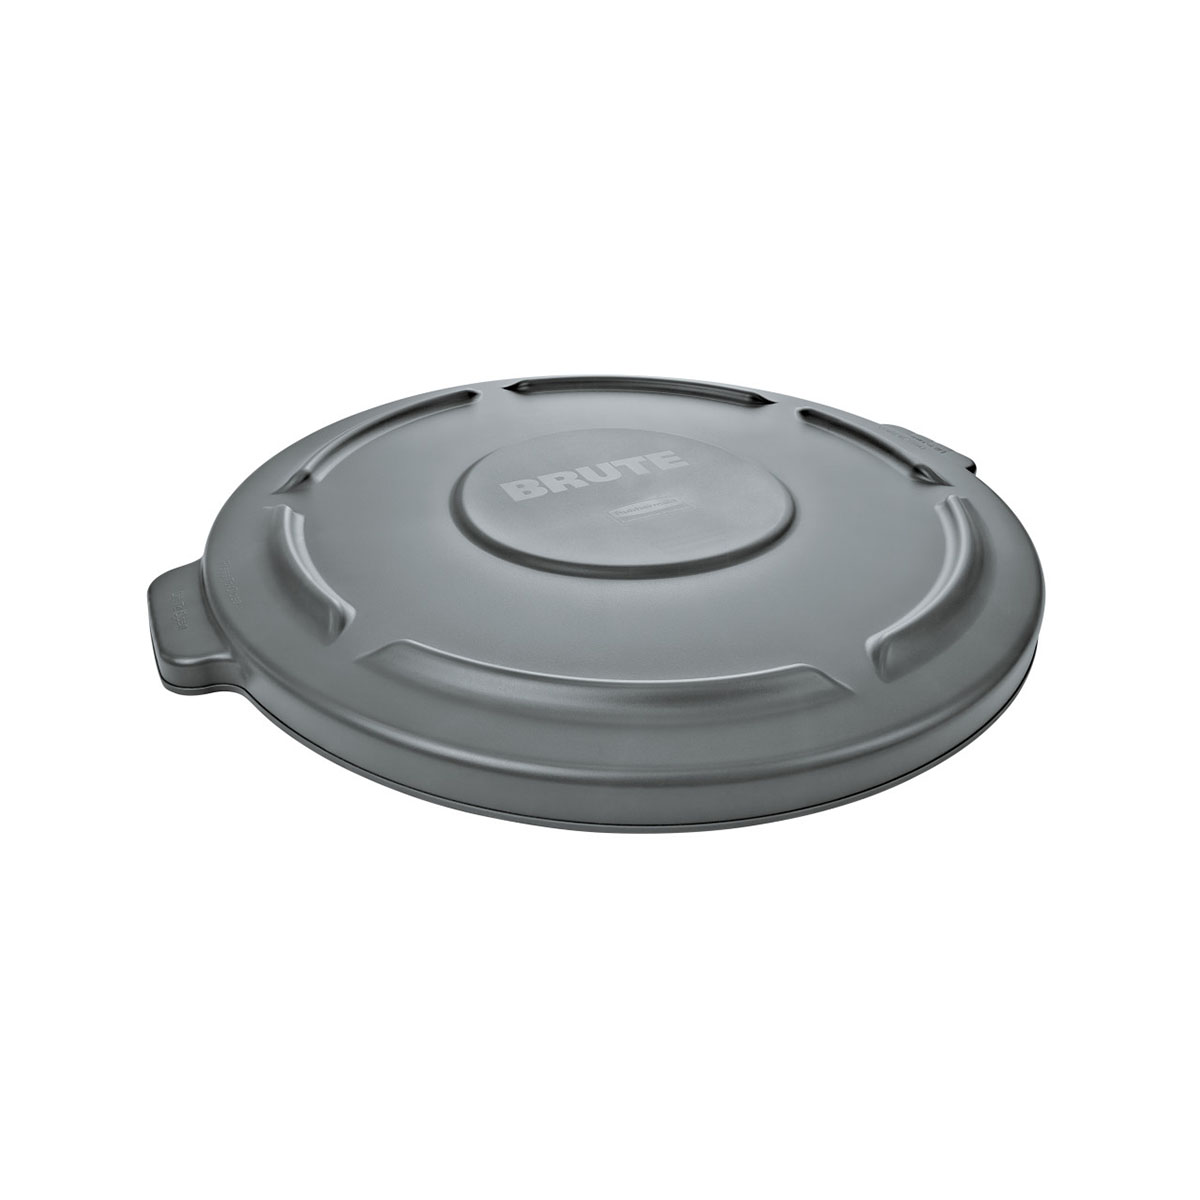 Rubbermaid Rubbermaid FG260900 Lid for Round Brute 10 Gallon Container  - Gray